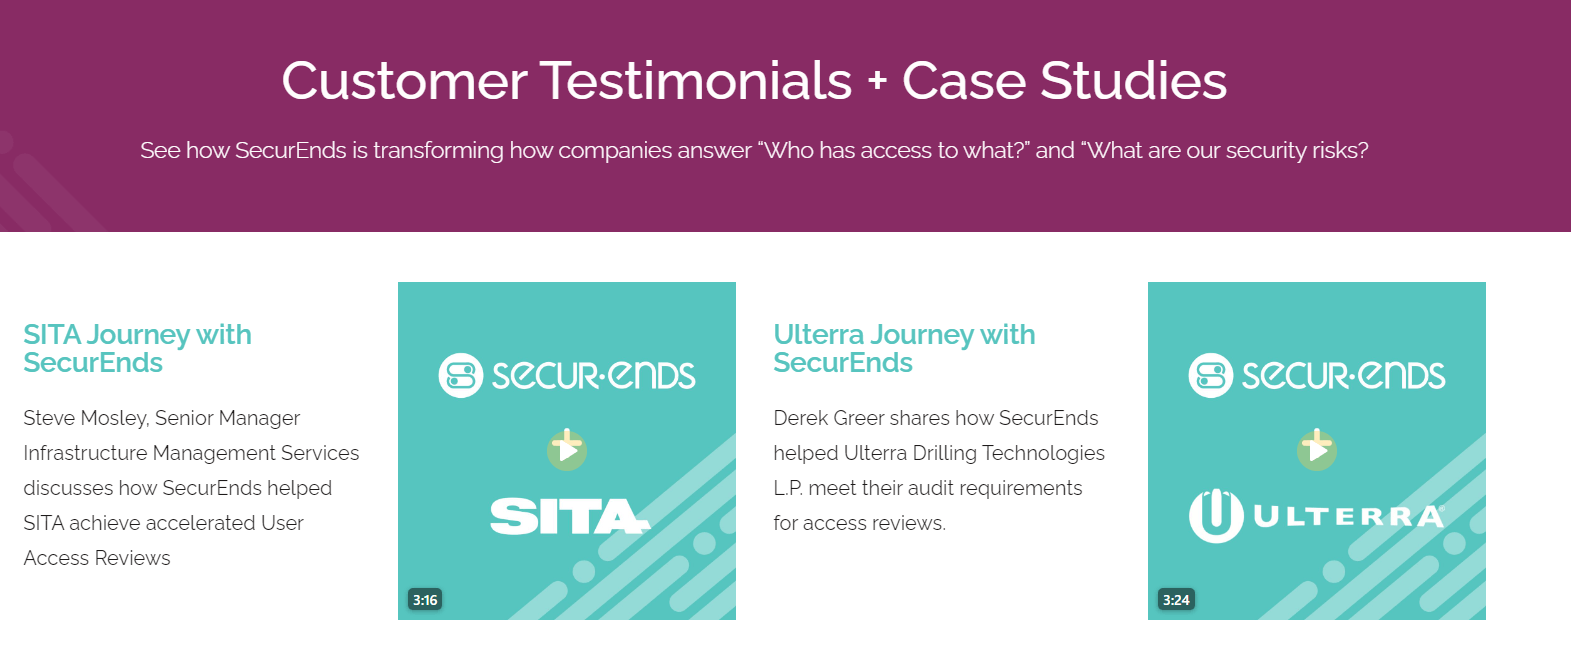 Customer testimonials and case studies page for Securends.